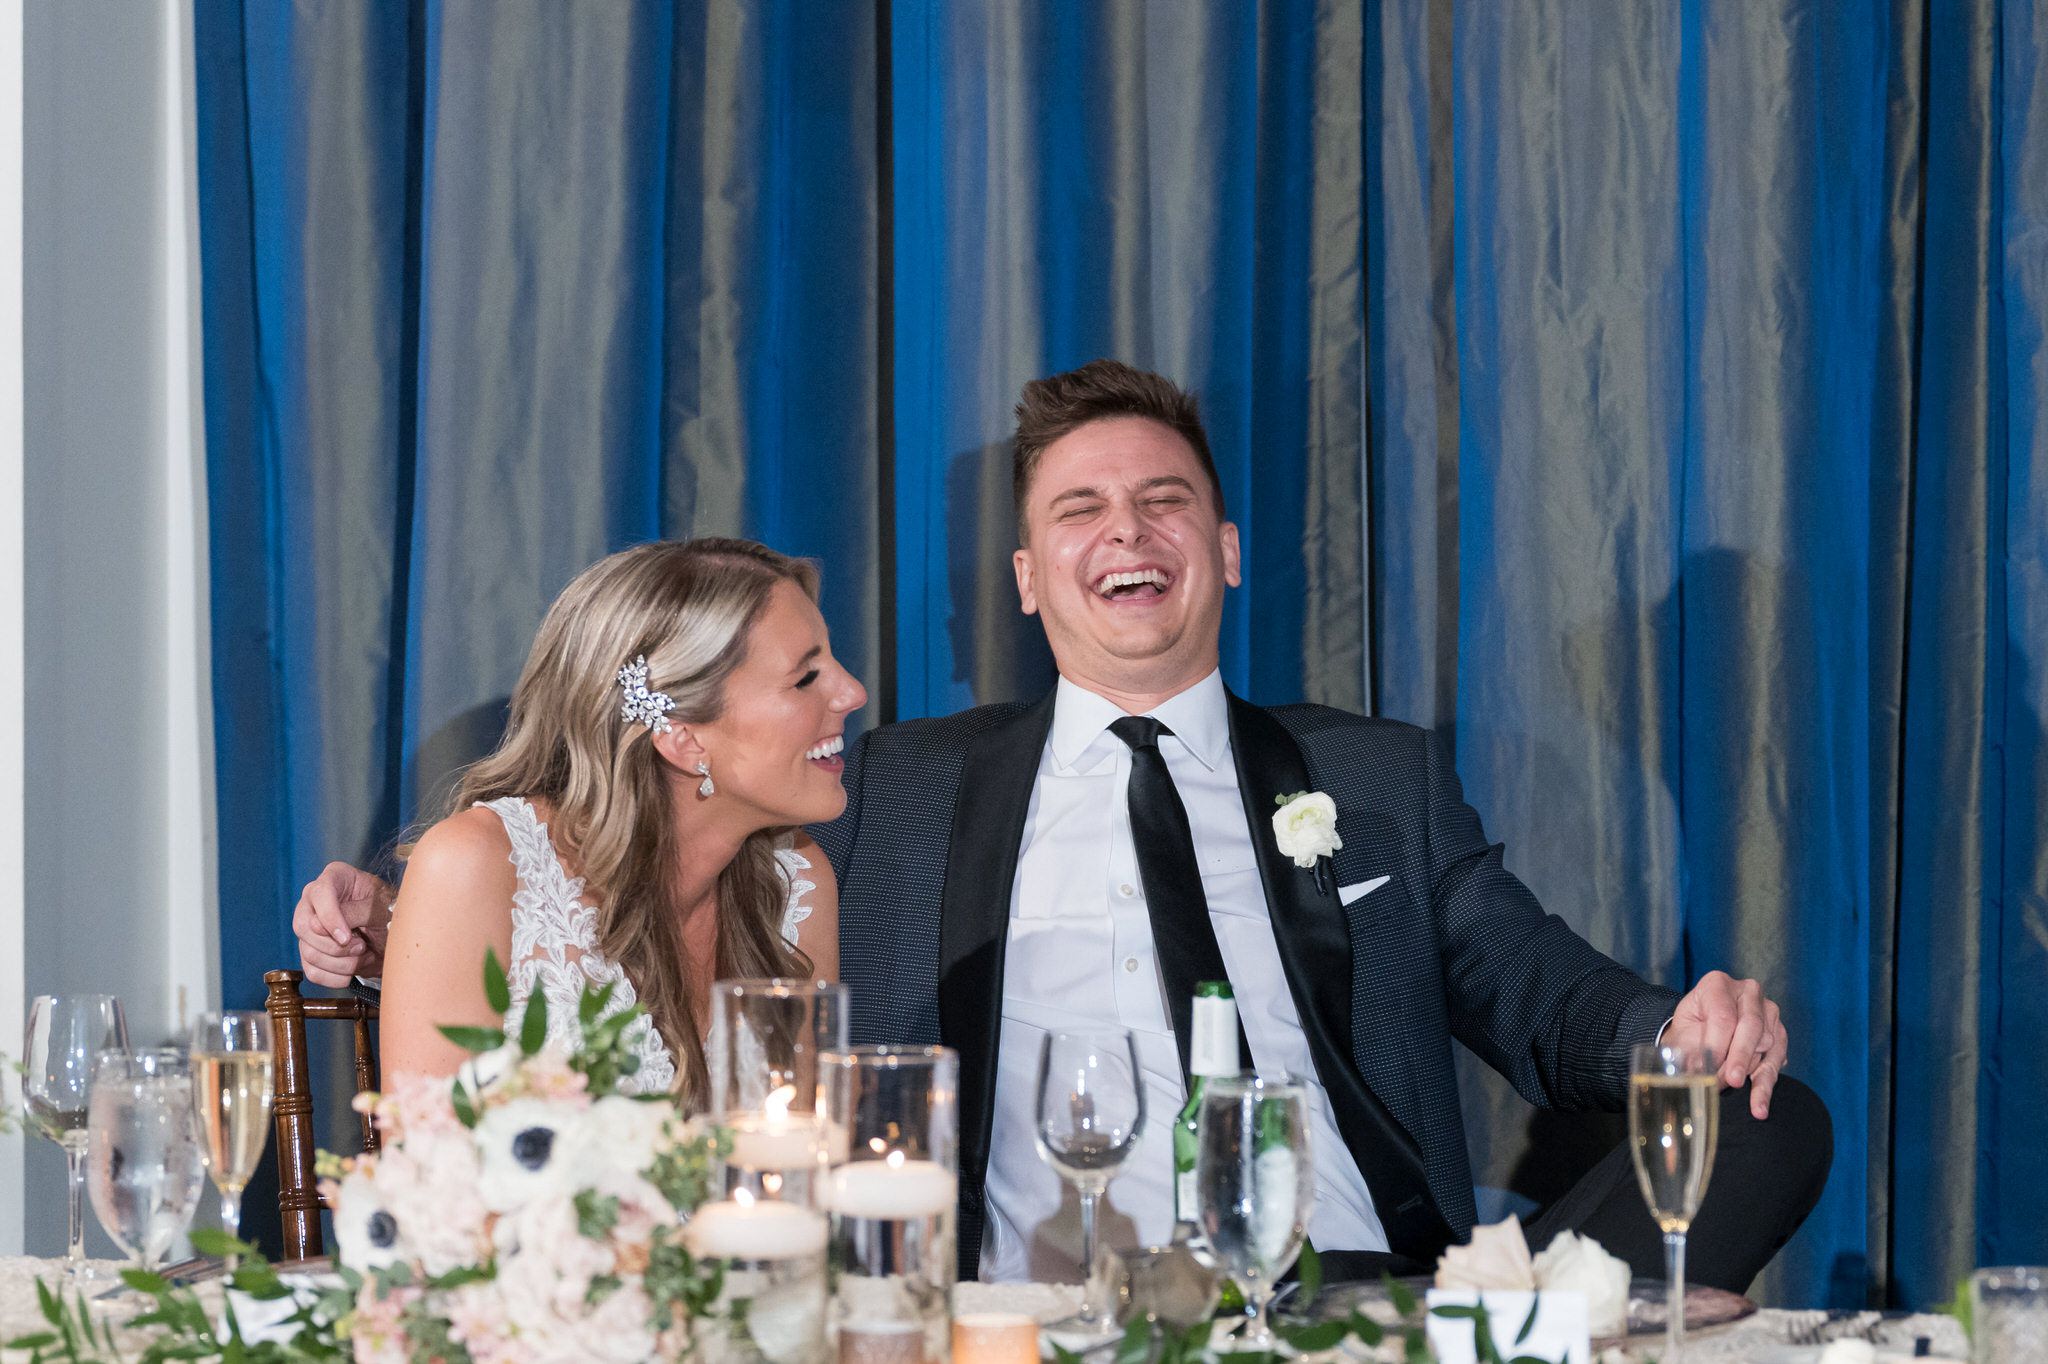 A groom laughs during speeches during his Westin Book Cadillac wedding reception.  